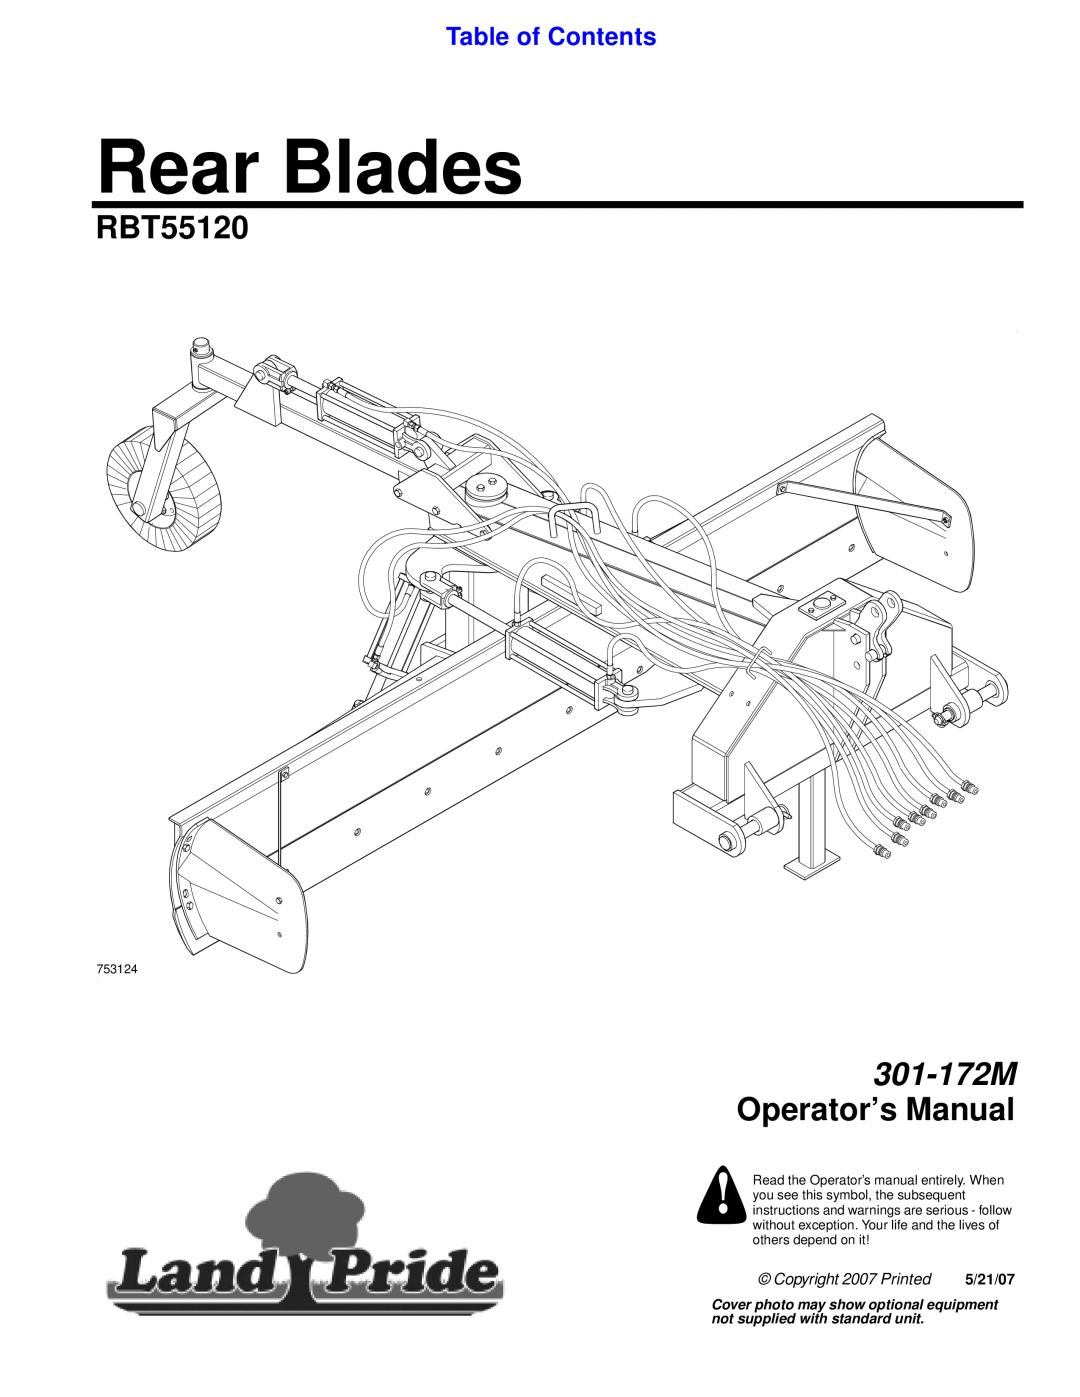 Land Pride RBT55120 manual Table of Contents, Rear Blades, 301-172M Operator’s Manual, Copyright 2007 Pr inted, 5/21/07 